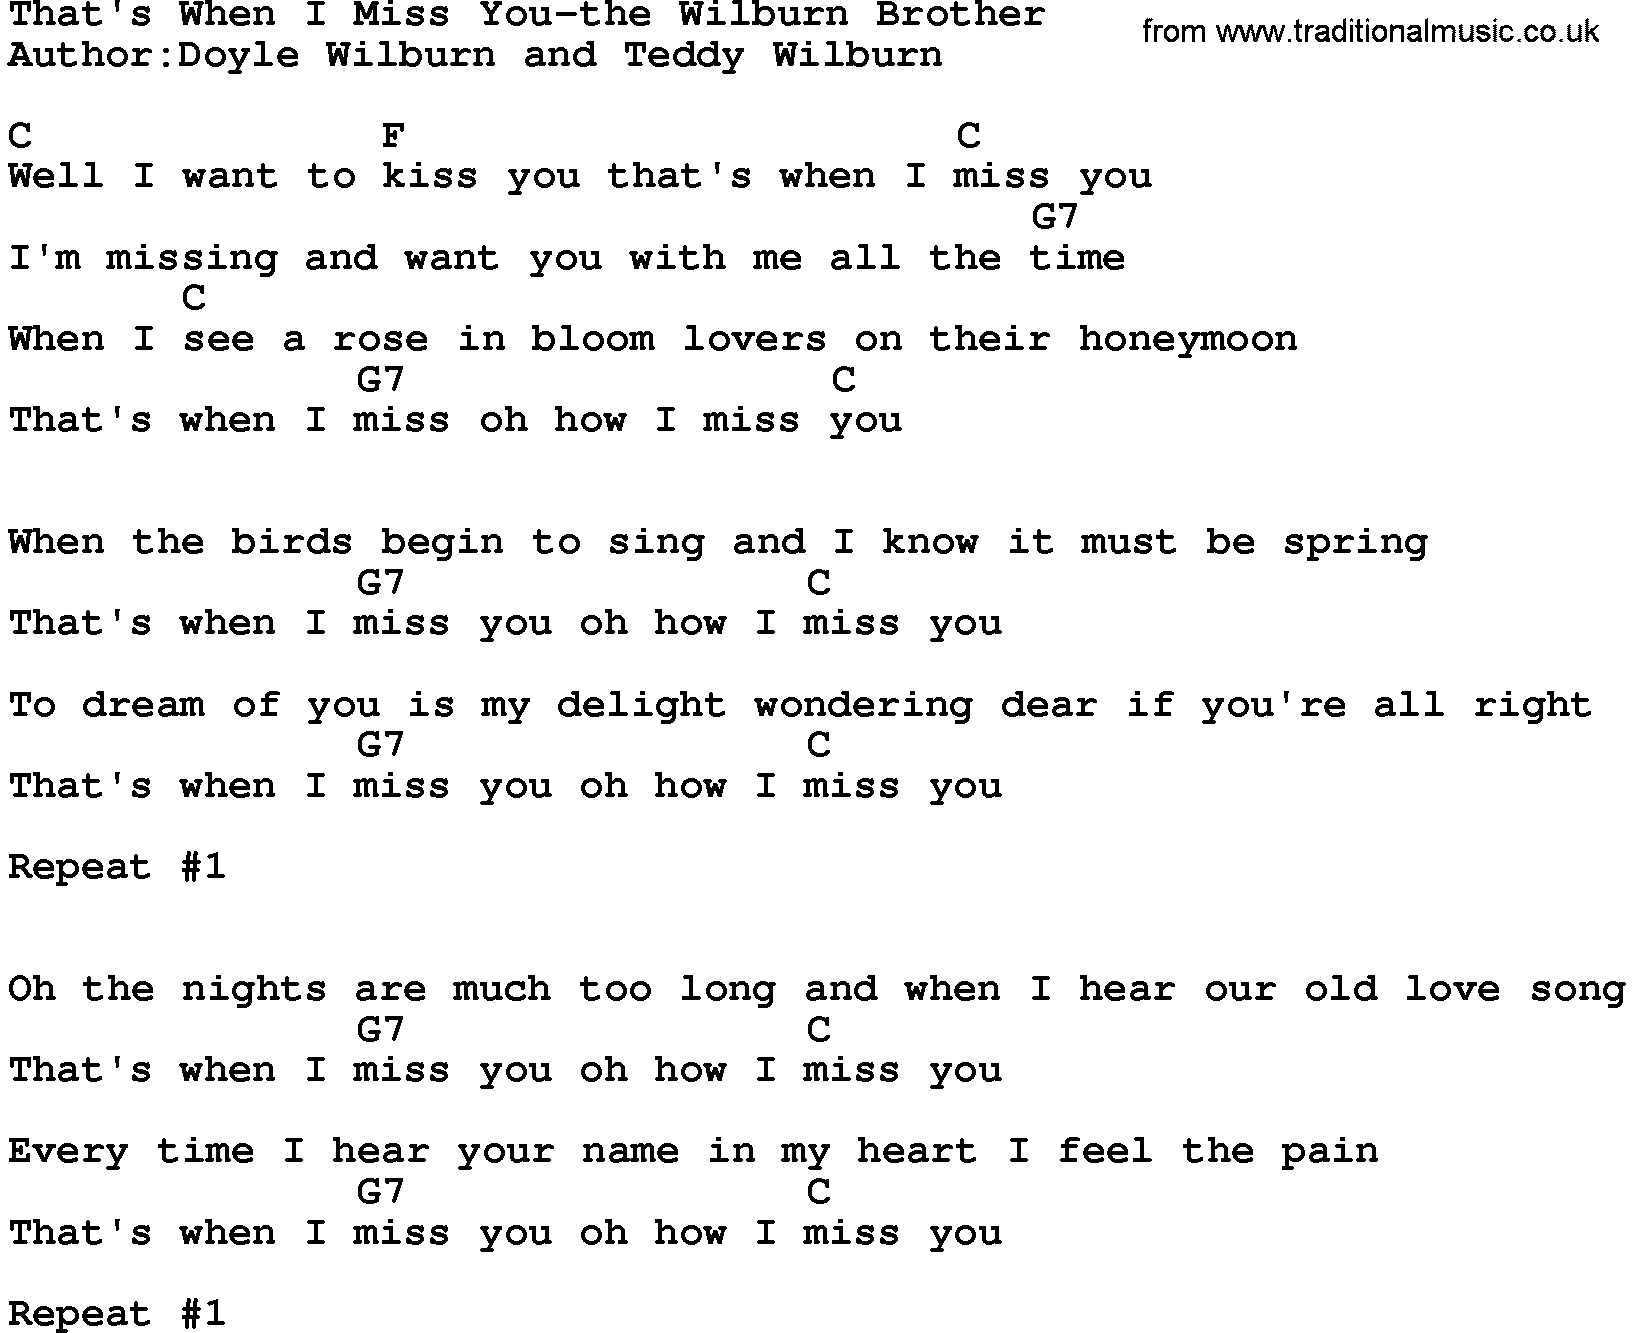 Country music song: That's When I Miss You-The Wilburn Brother lyrics and chords